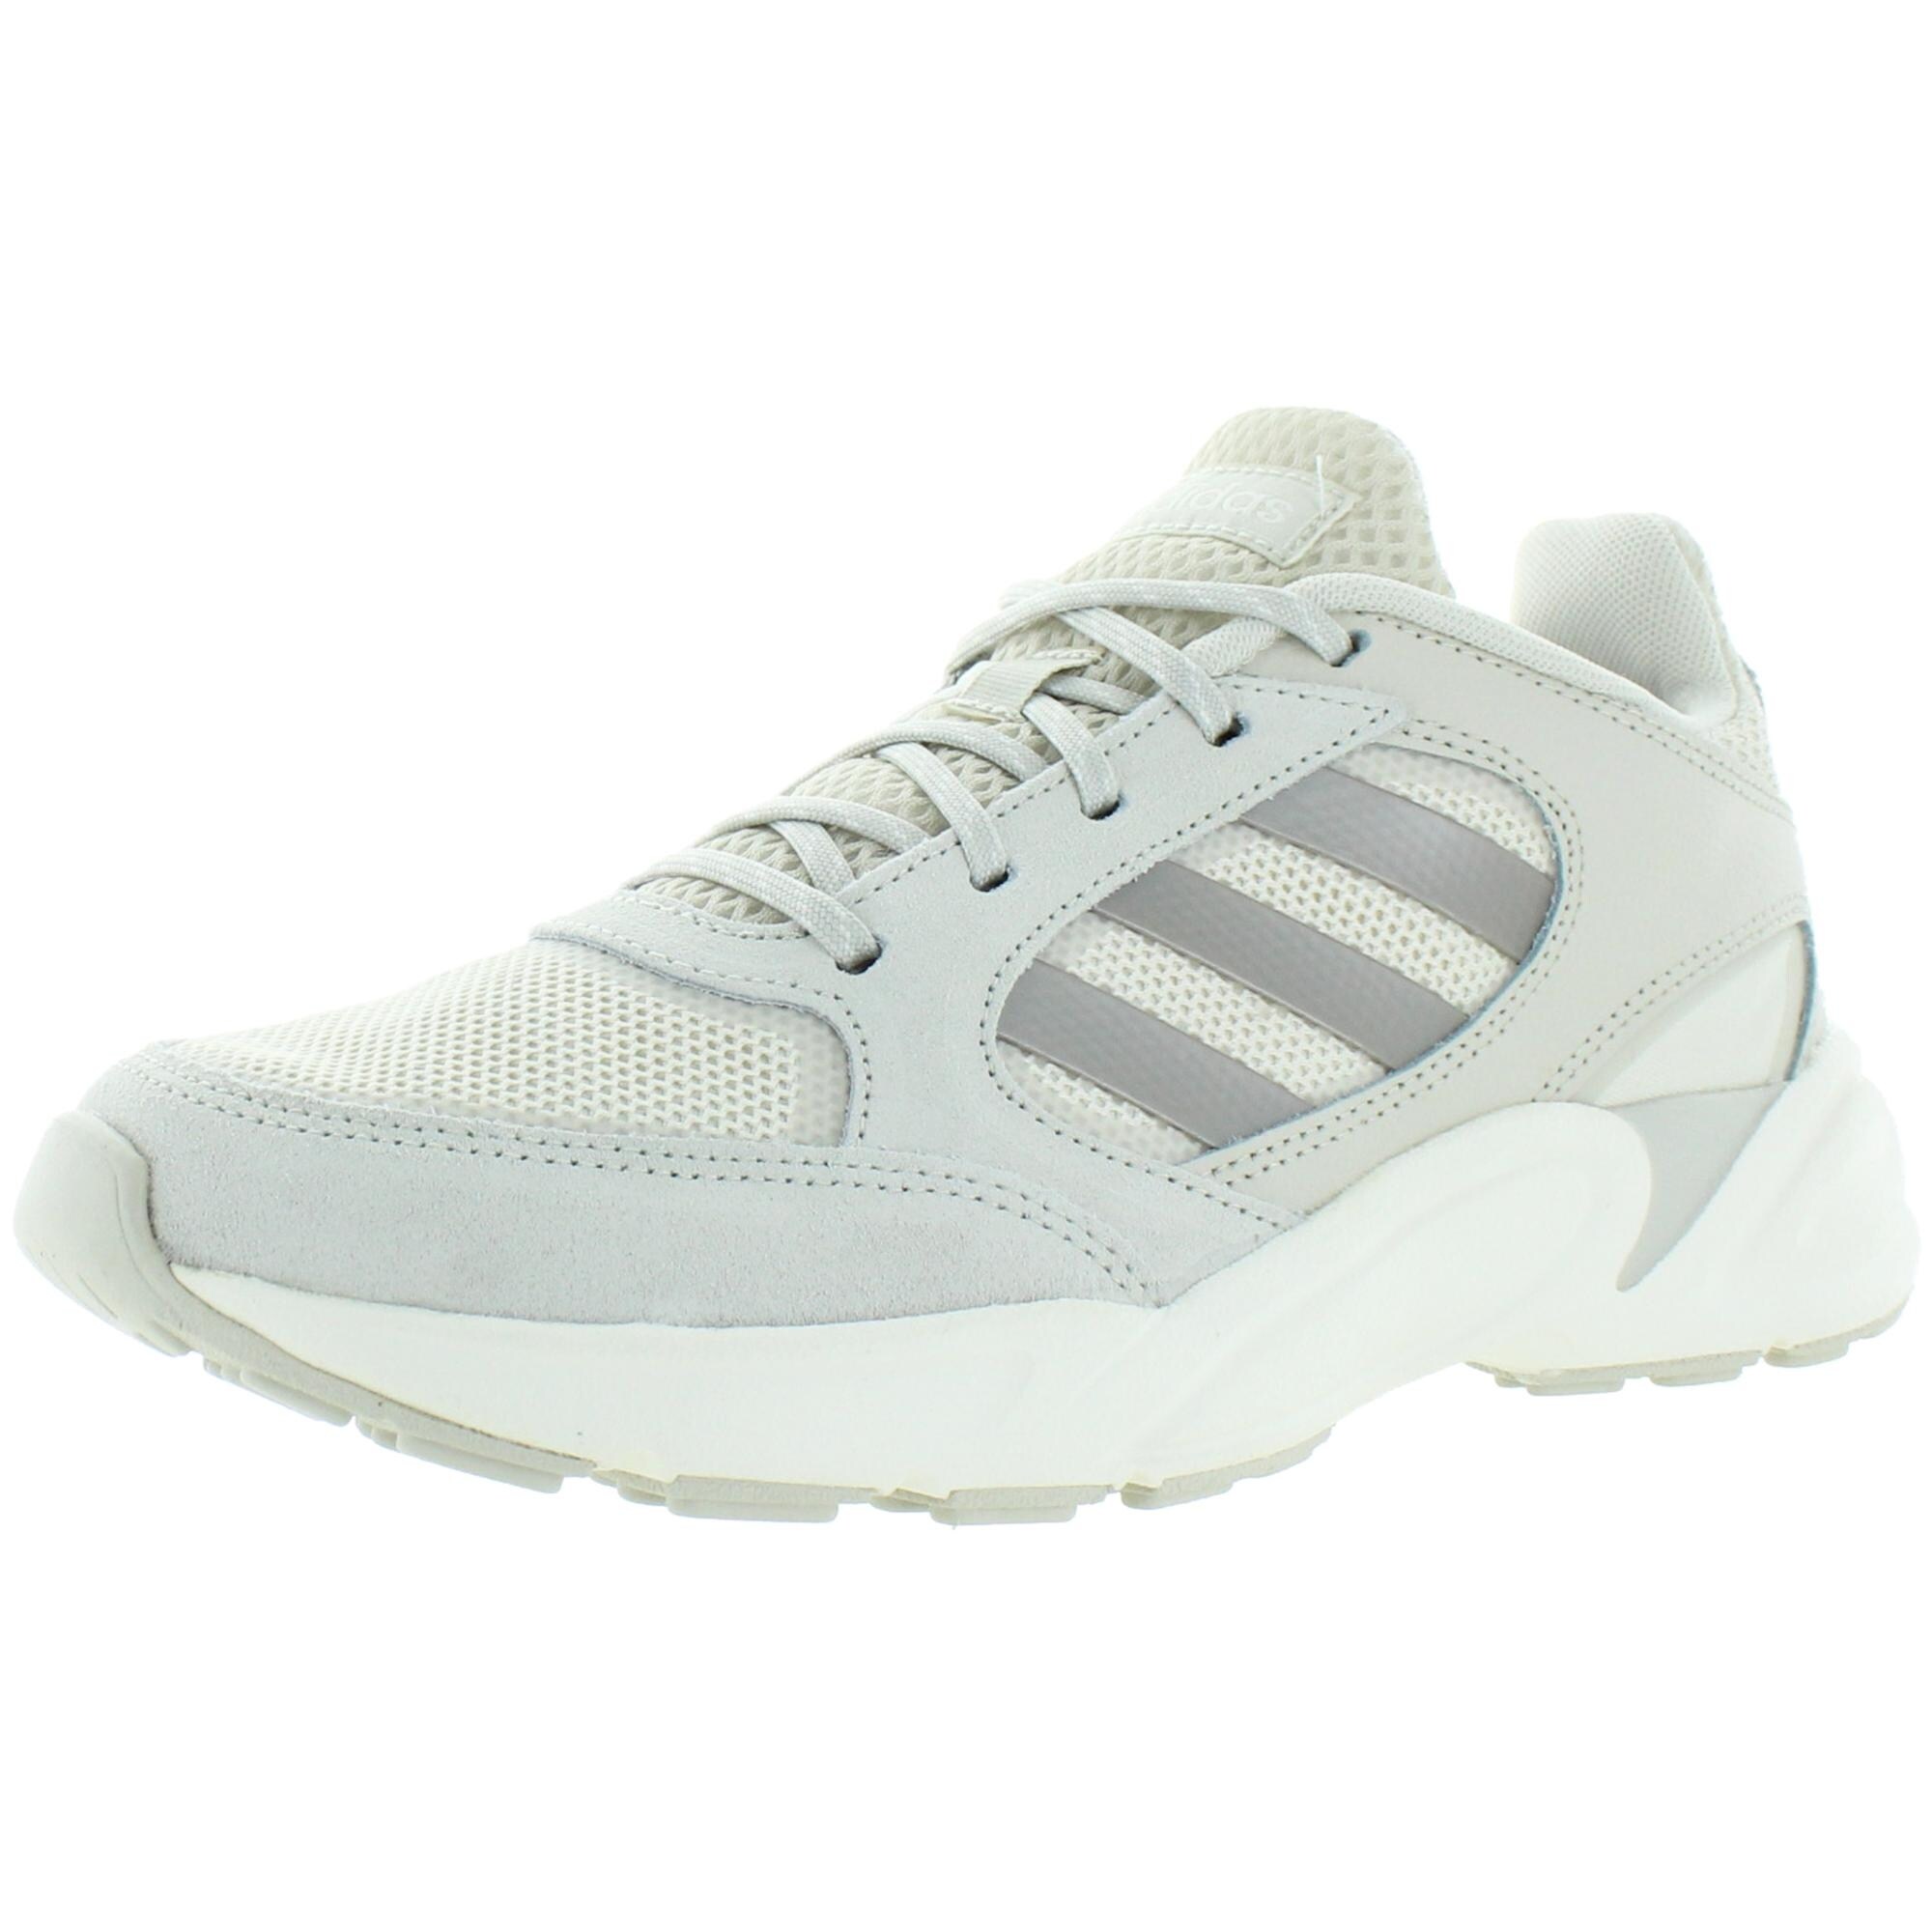 adidas white leather ladies trainers